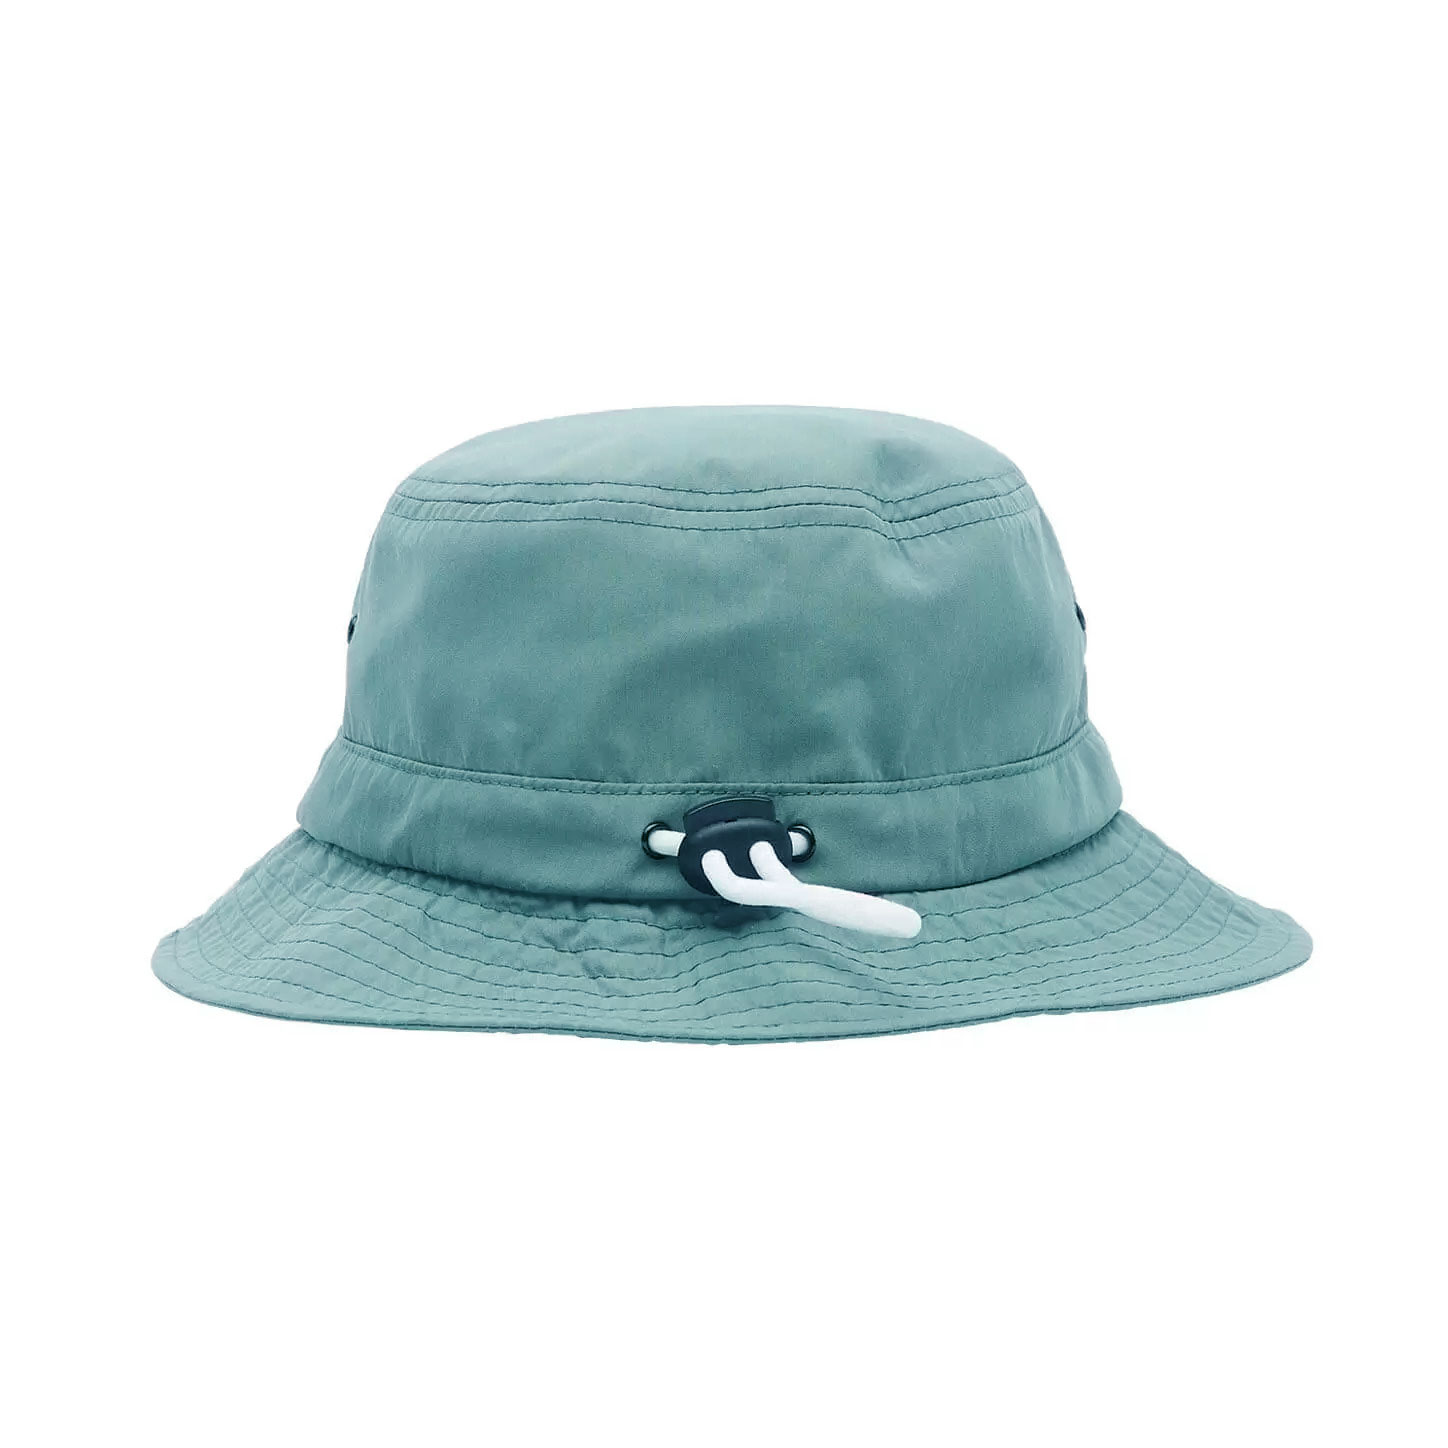 Obey Bold Century Bucket Hat - Turquoise